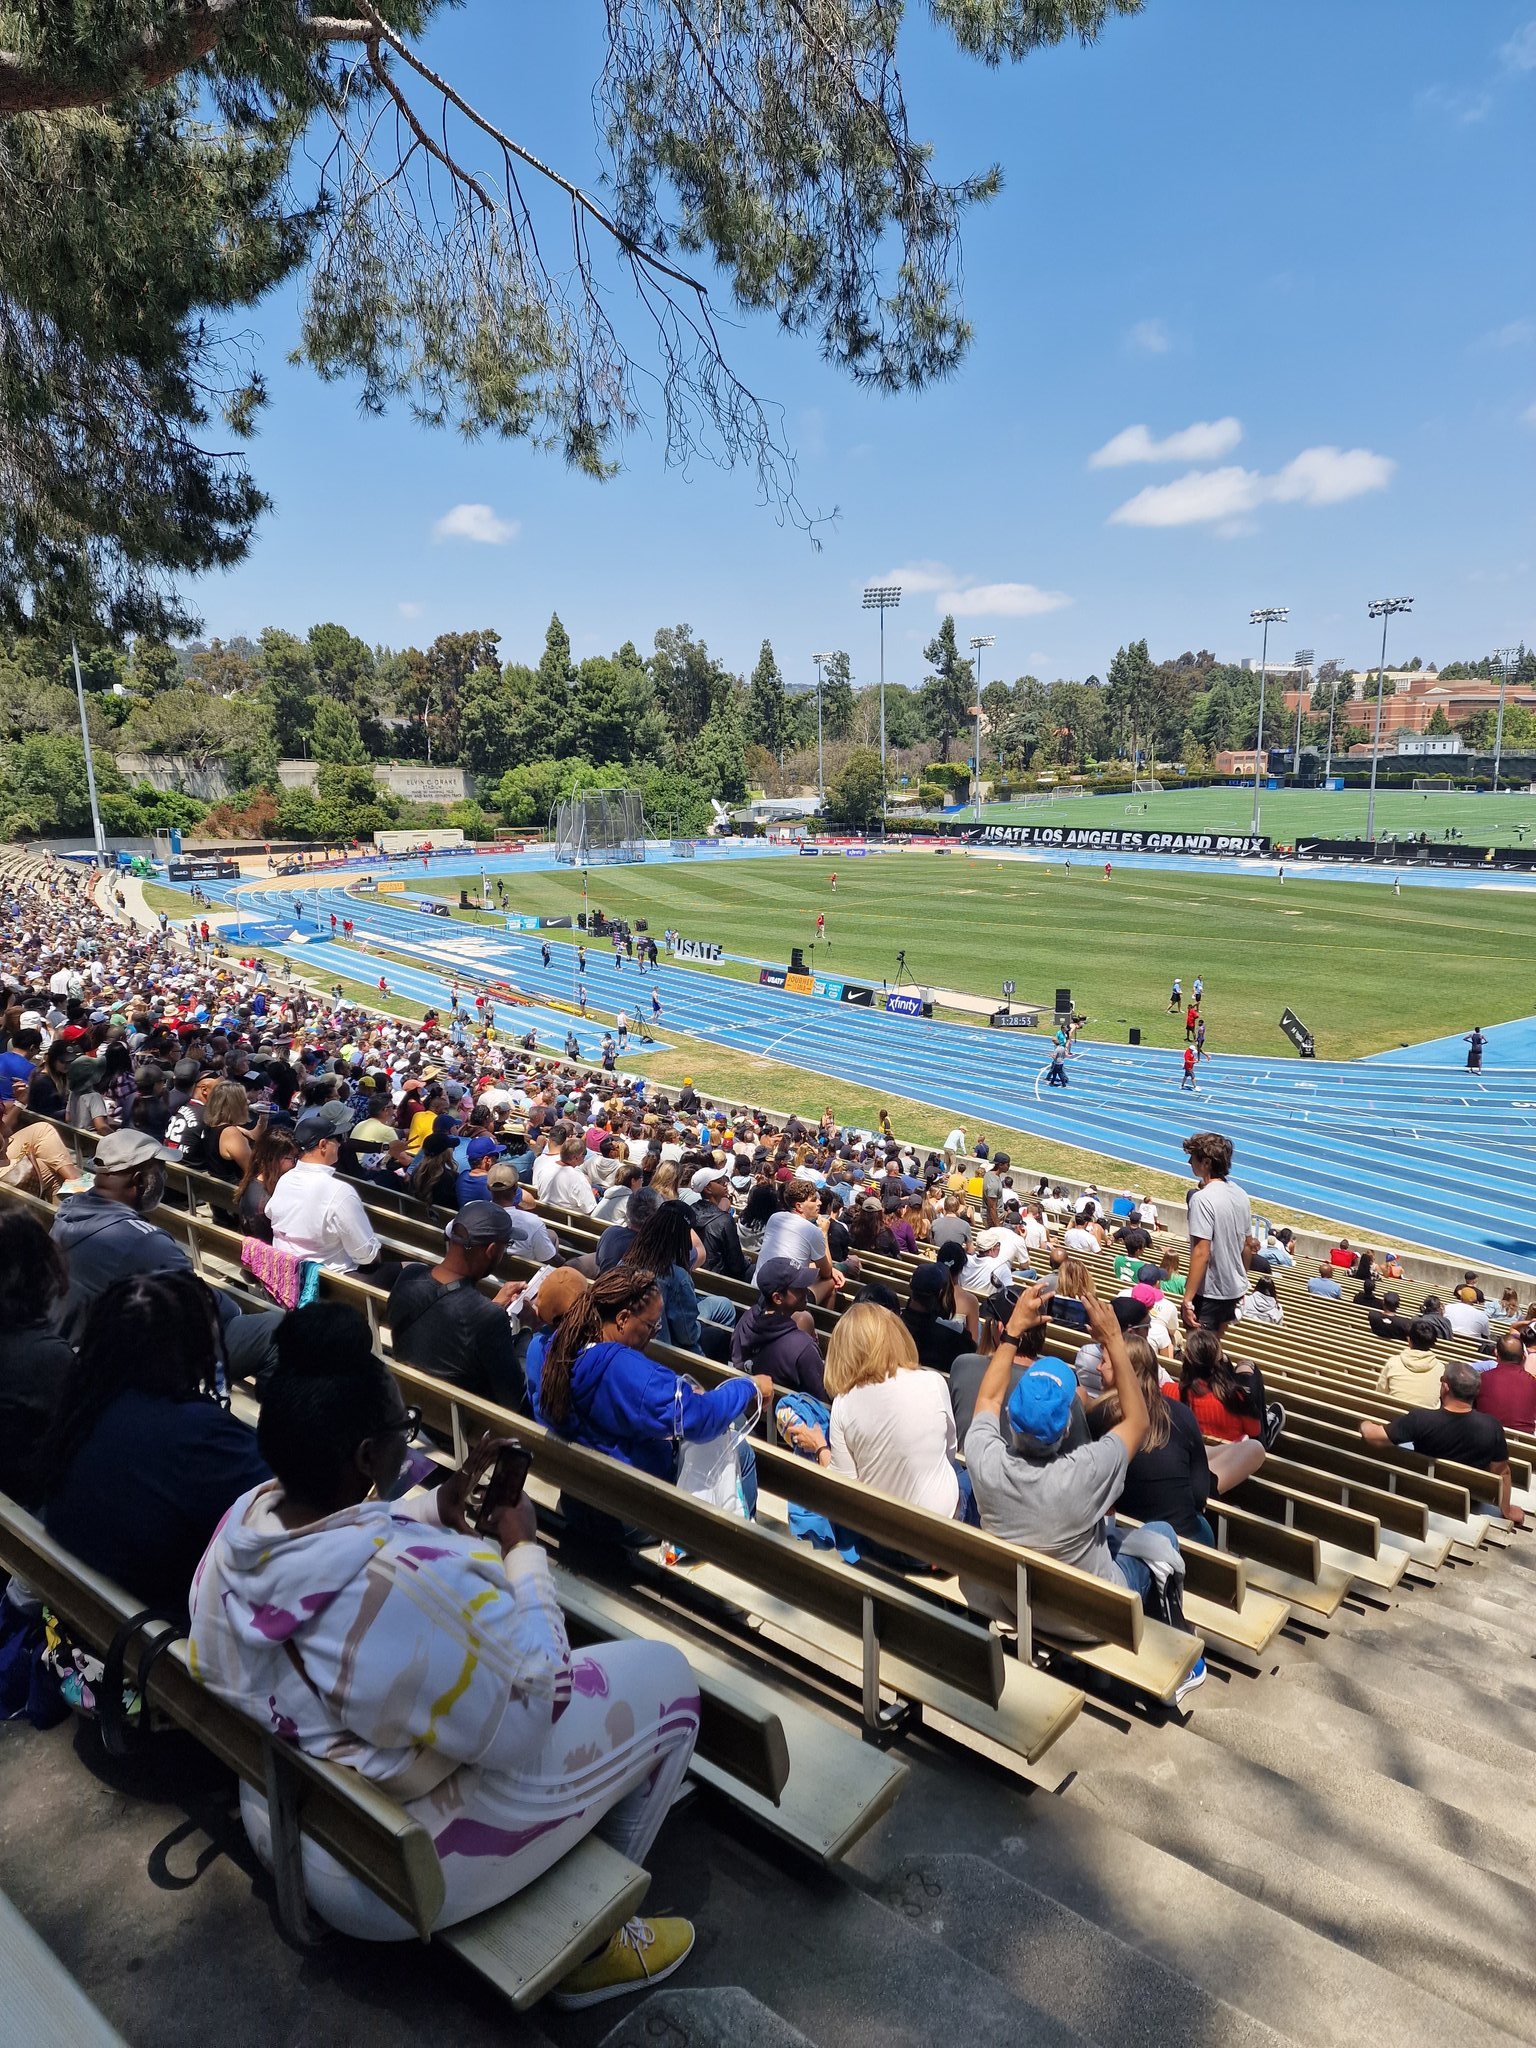 USATF optimistic about raising profile of athletics before 2028 Olympics after first Los Angeles Grand Prix